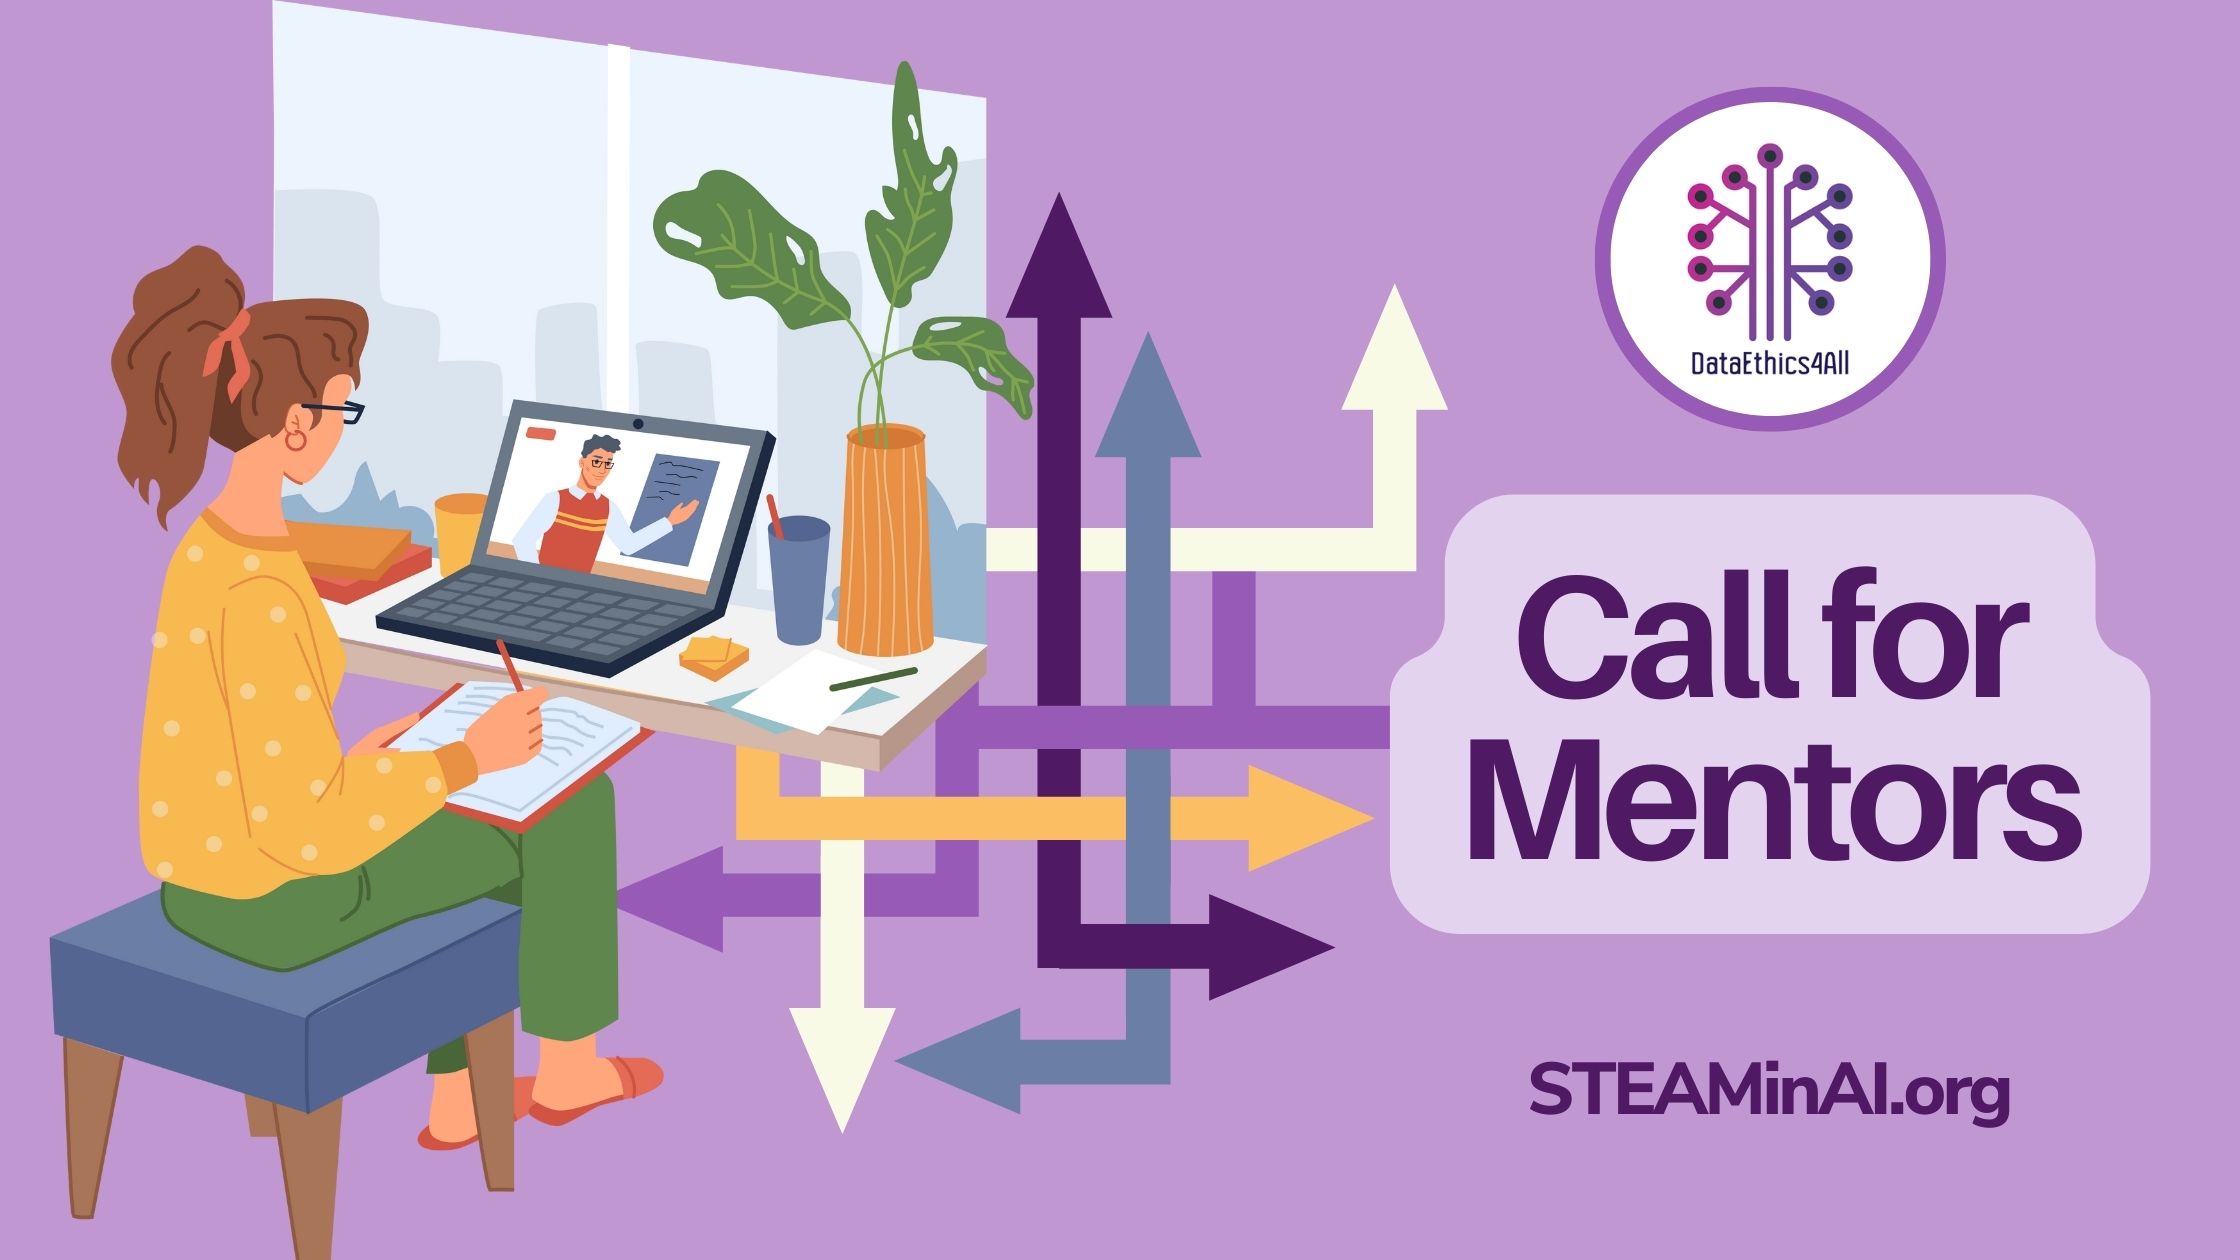 STEAM in AI Call for Mentors Newsletter